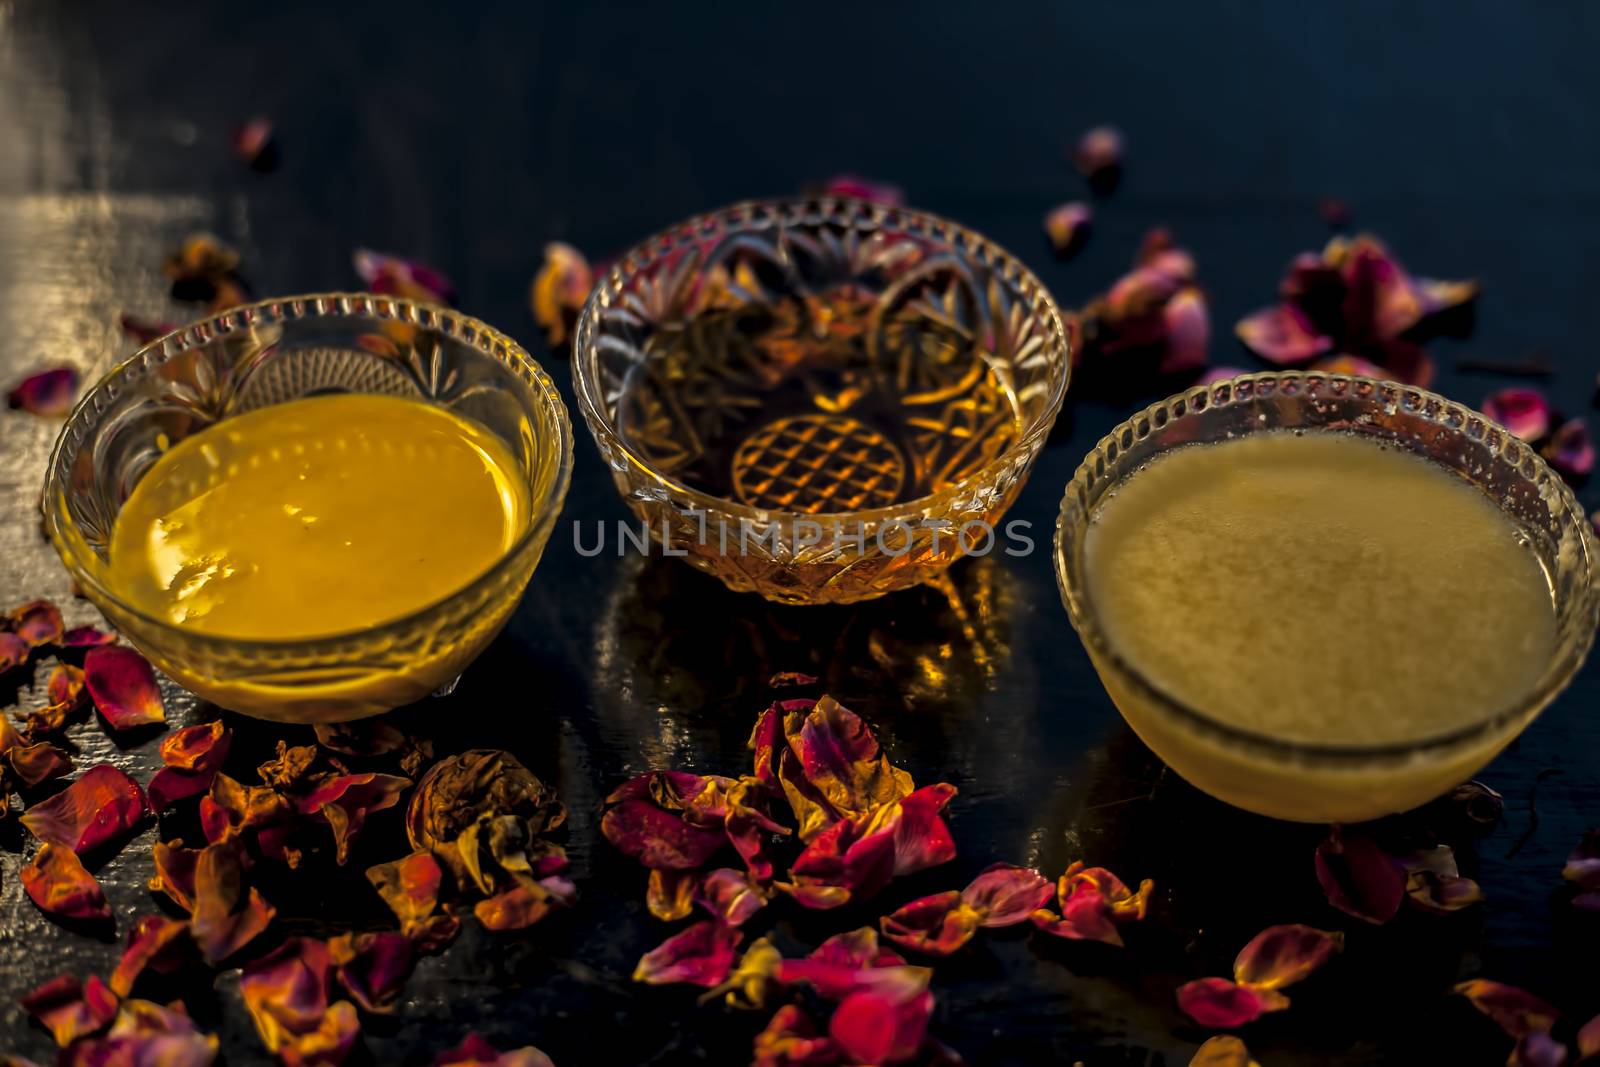 Ayurvedic moisturizer face mask on black glossy surface in a glass bowl with some ghee or clarified butter, honey and pack. by mirzamlk